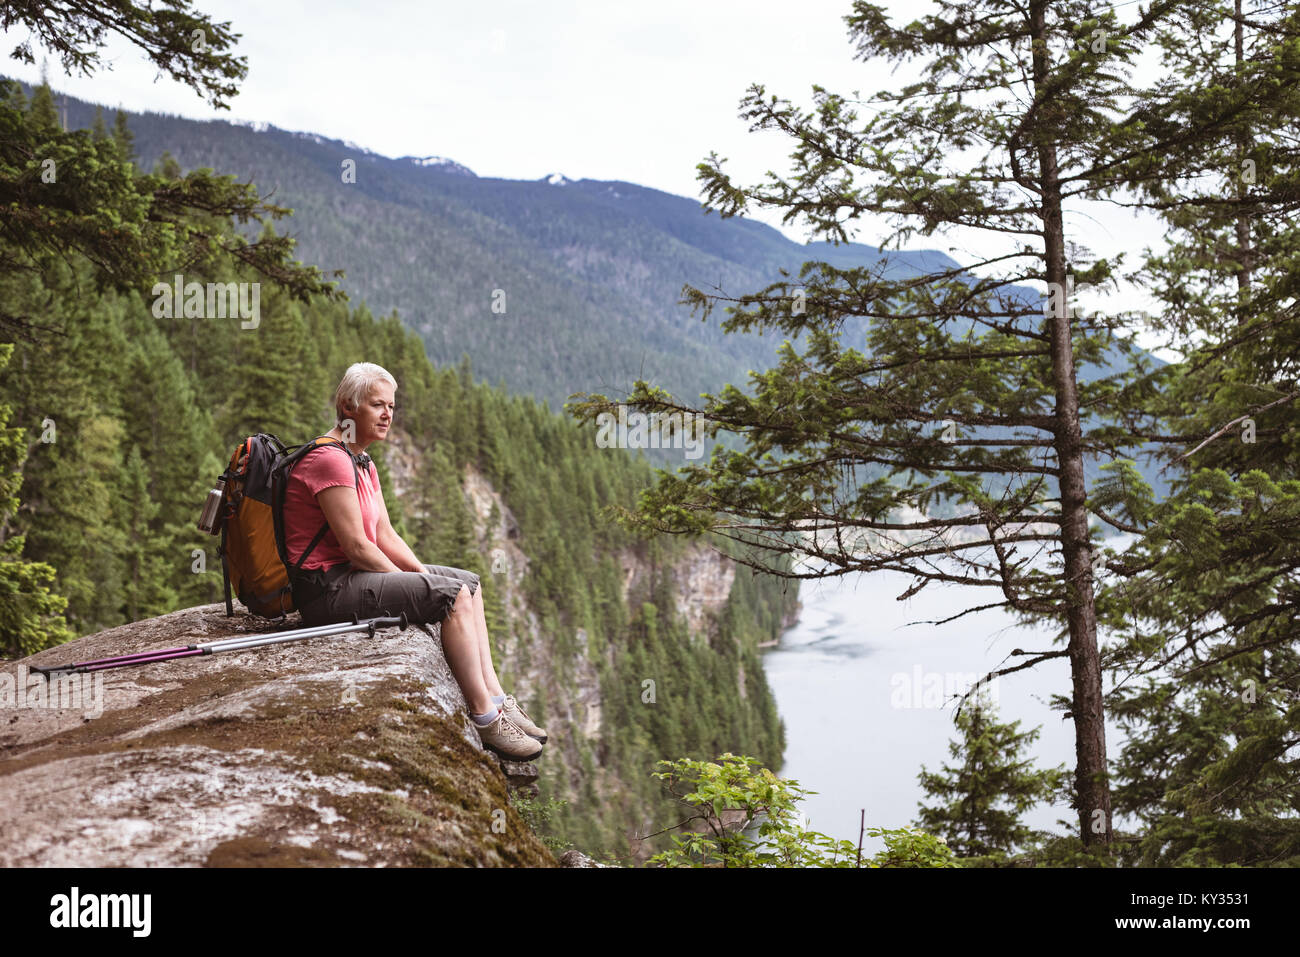 Mature woman relaxing on rock and looking at view Stock Photo